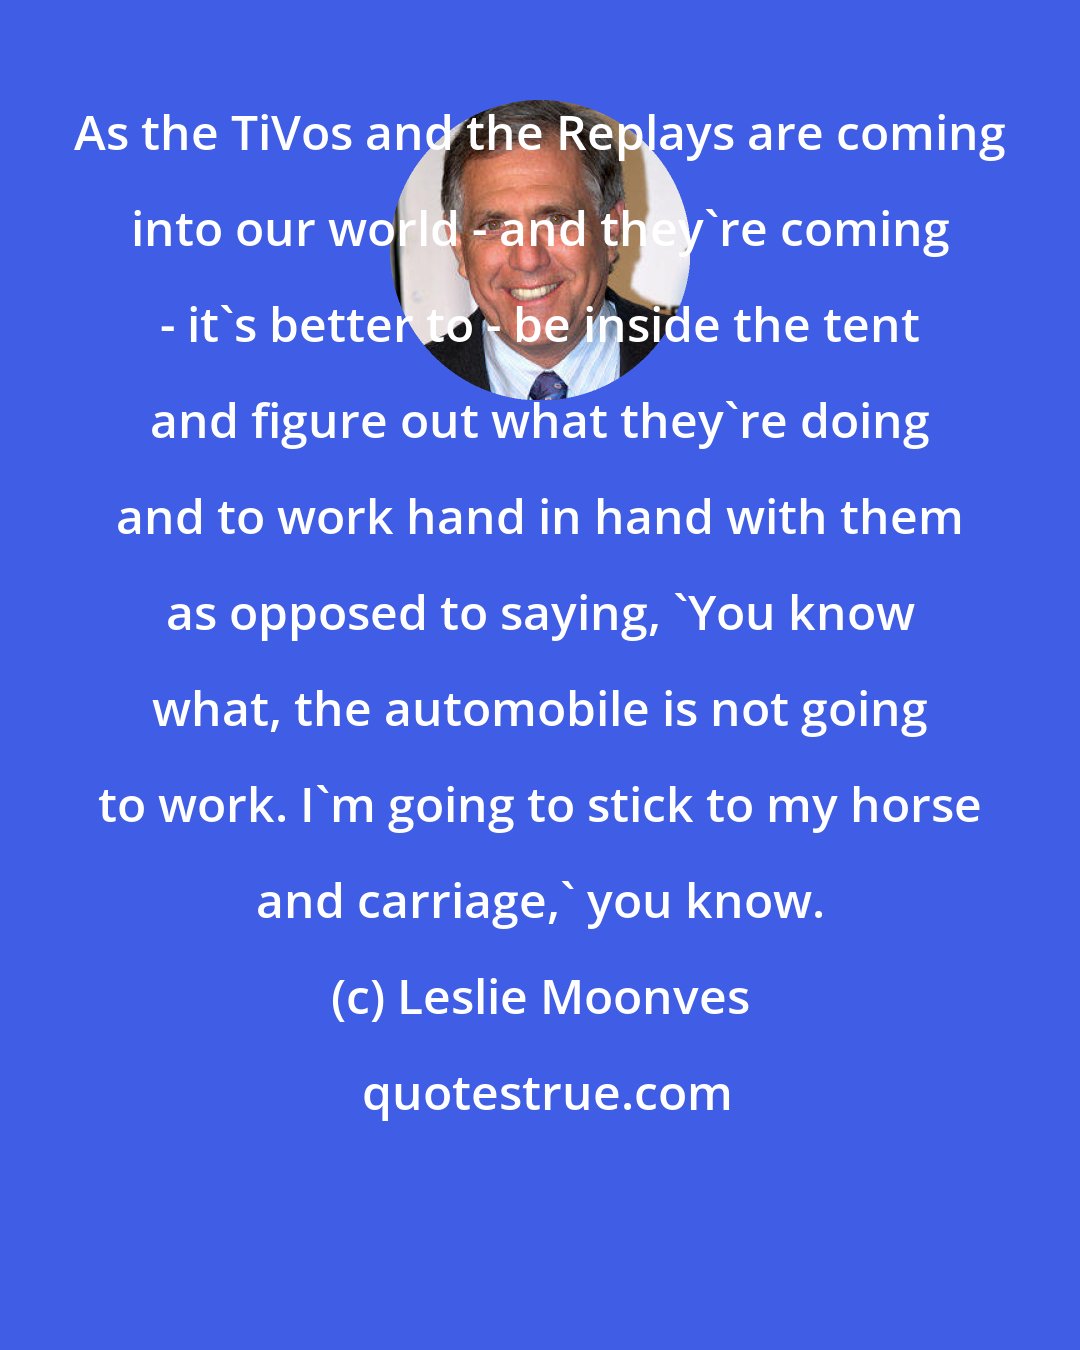 Leslie Moonves: As the TiVos and the Replays are coming into our world - and they're coming - it's better to - be inside the tent and figure out what they're doing and to work hand in hand with them as opposed to saying, 'You know what, the automobile is not going to work. I'm going to stick to my horse and carriage,' you know.